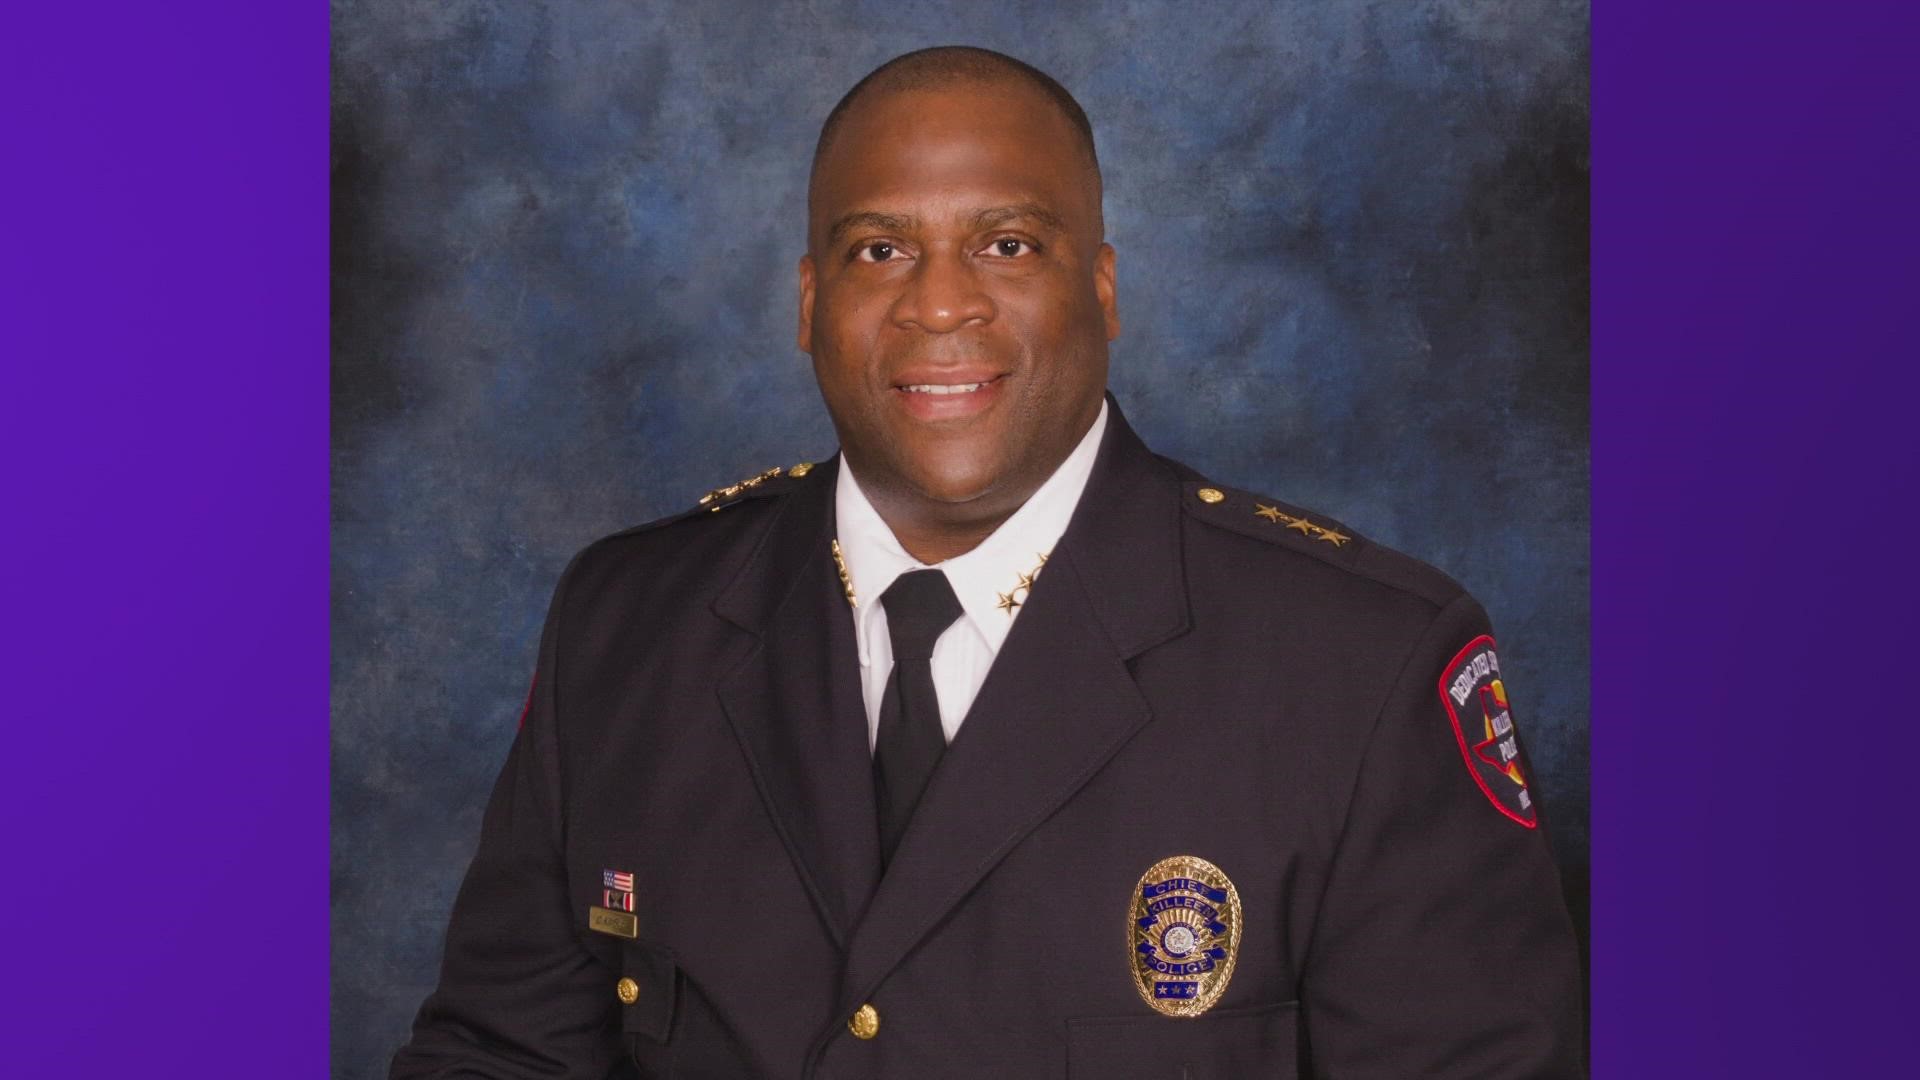 Police Chief Charles Kimble will retire effective January 27, according a spokesperson for the city.